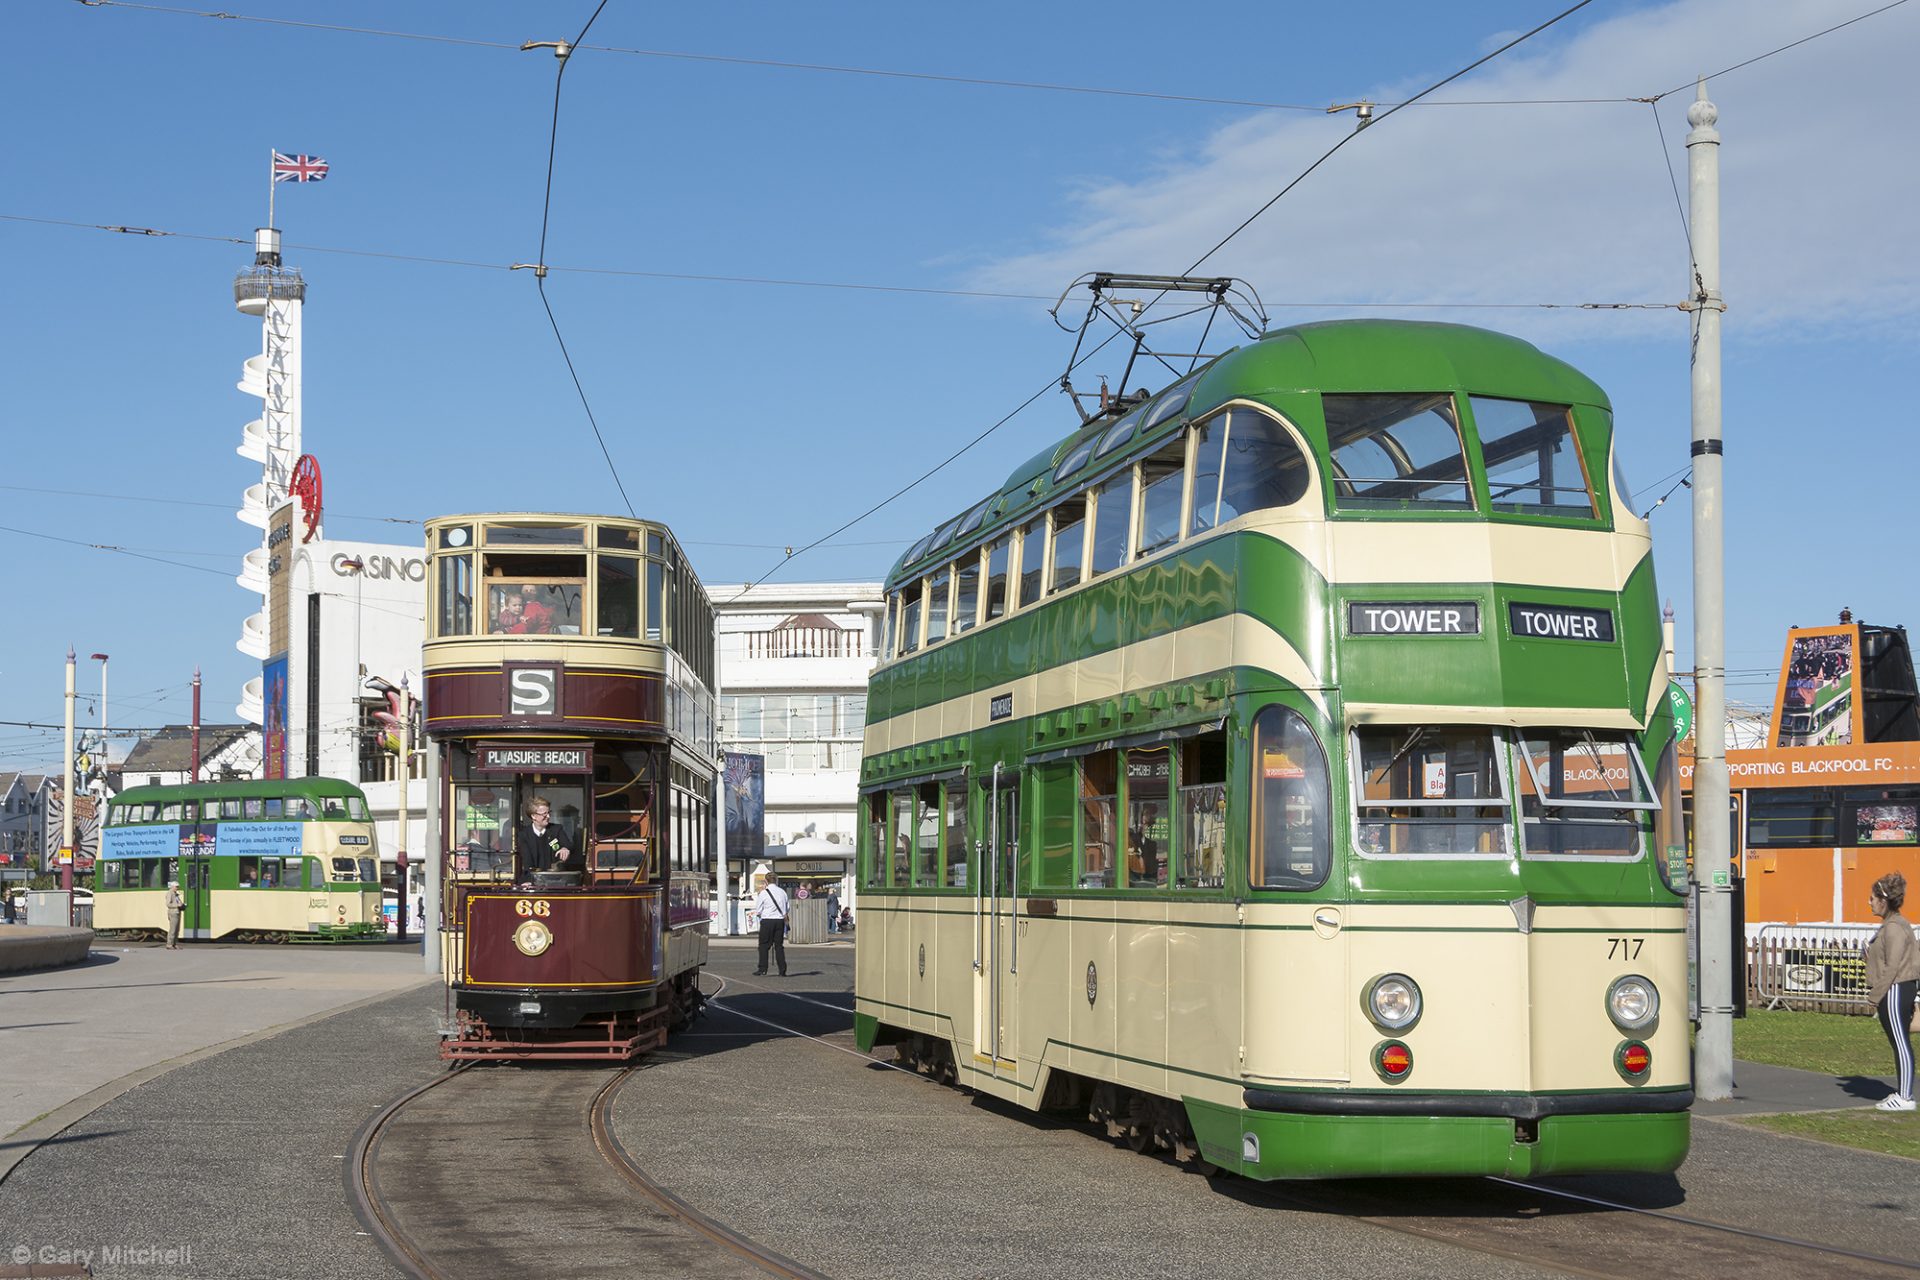 Blackpool Heritage Tram Tours are a brilliant way to take in the promenade and enjoy an iconic, traditional part of Blackpool.